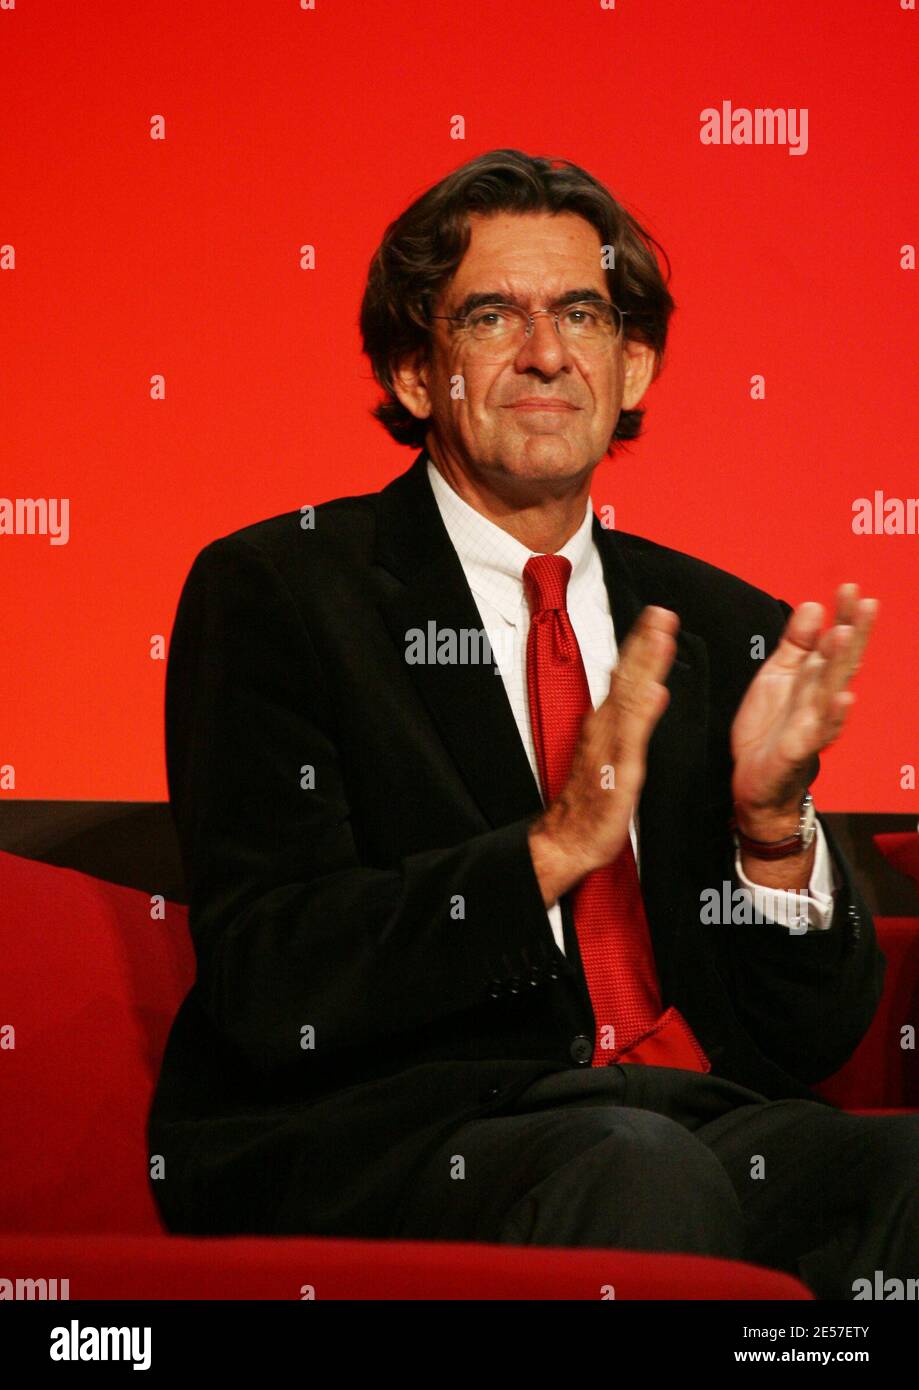 Luc Ferry during the Nids d'Or for Nestle party held at the Theatre des Champs-Elysees in Paris, France on September 15, 2008. Photo by Denis Guignebourg/ABACAPRESS.COM Stock Photo